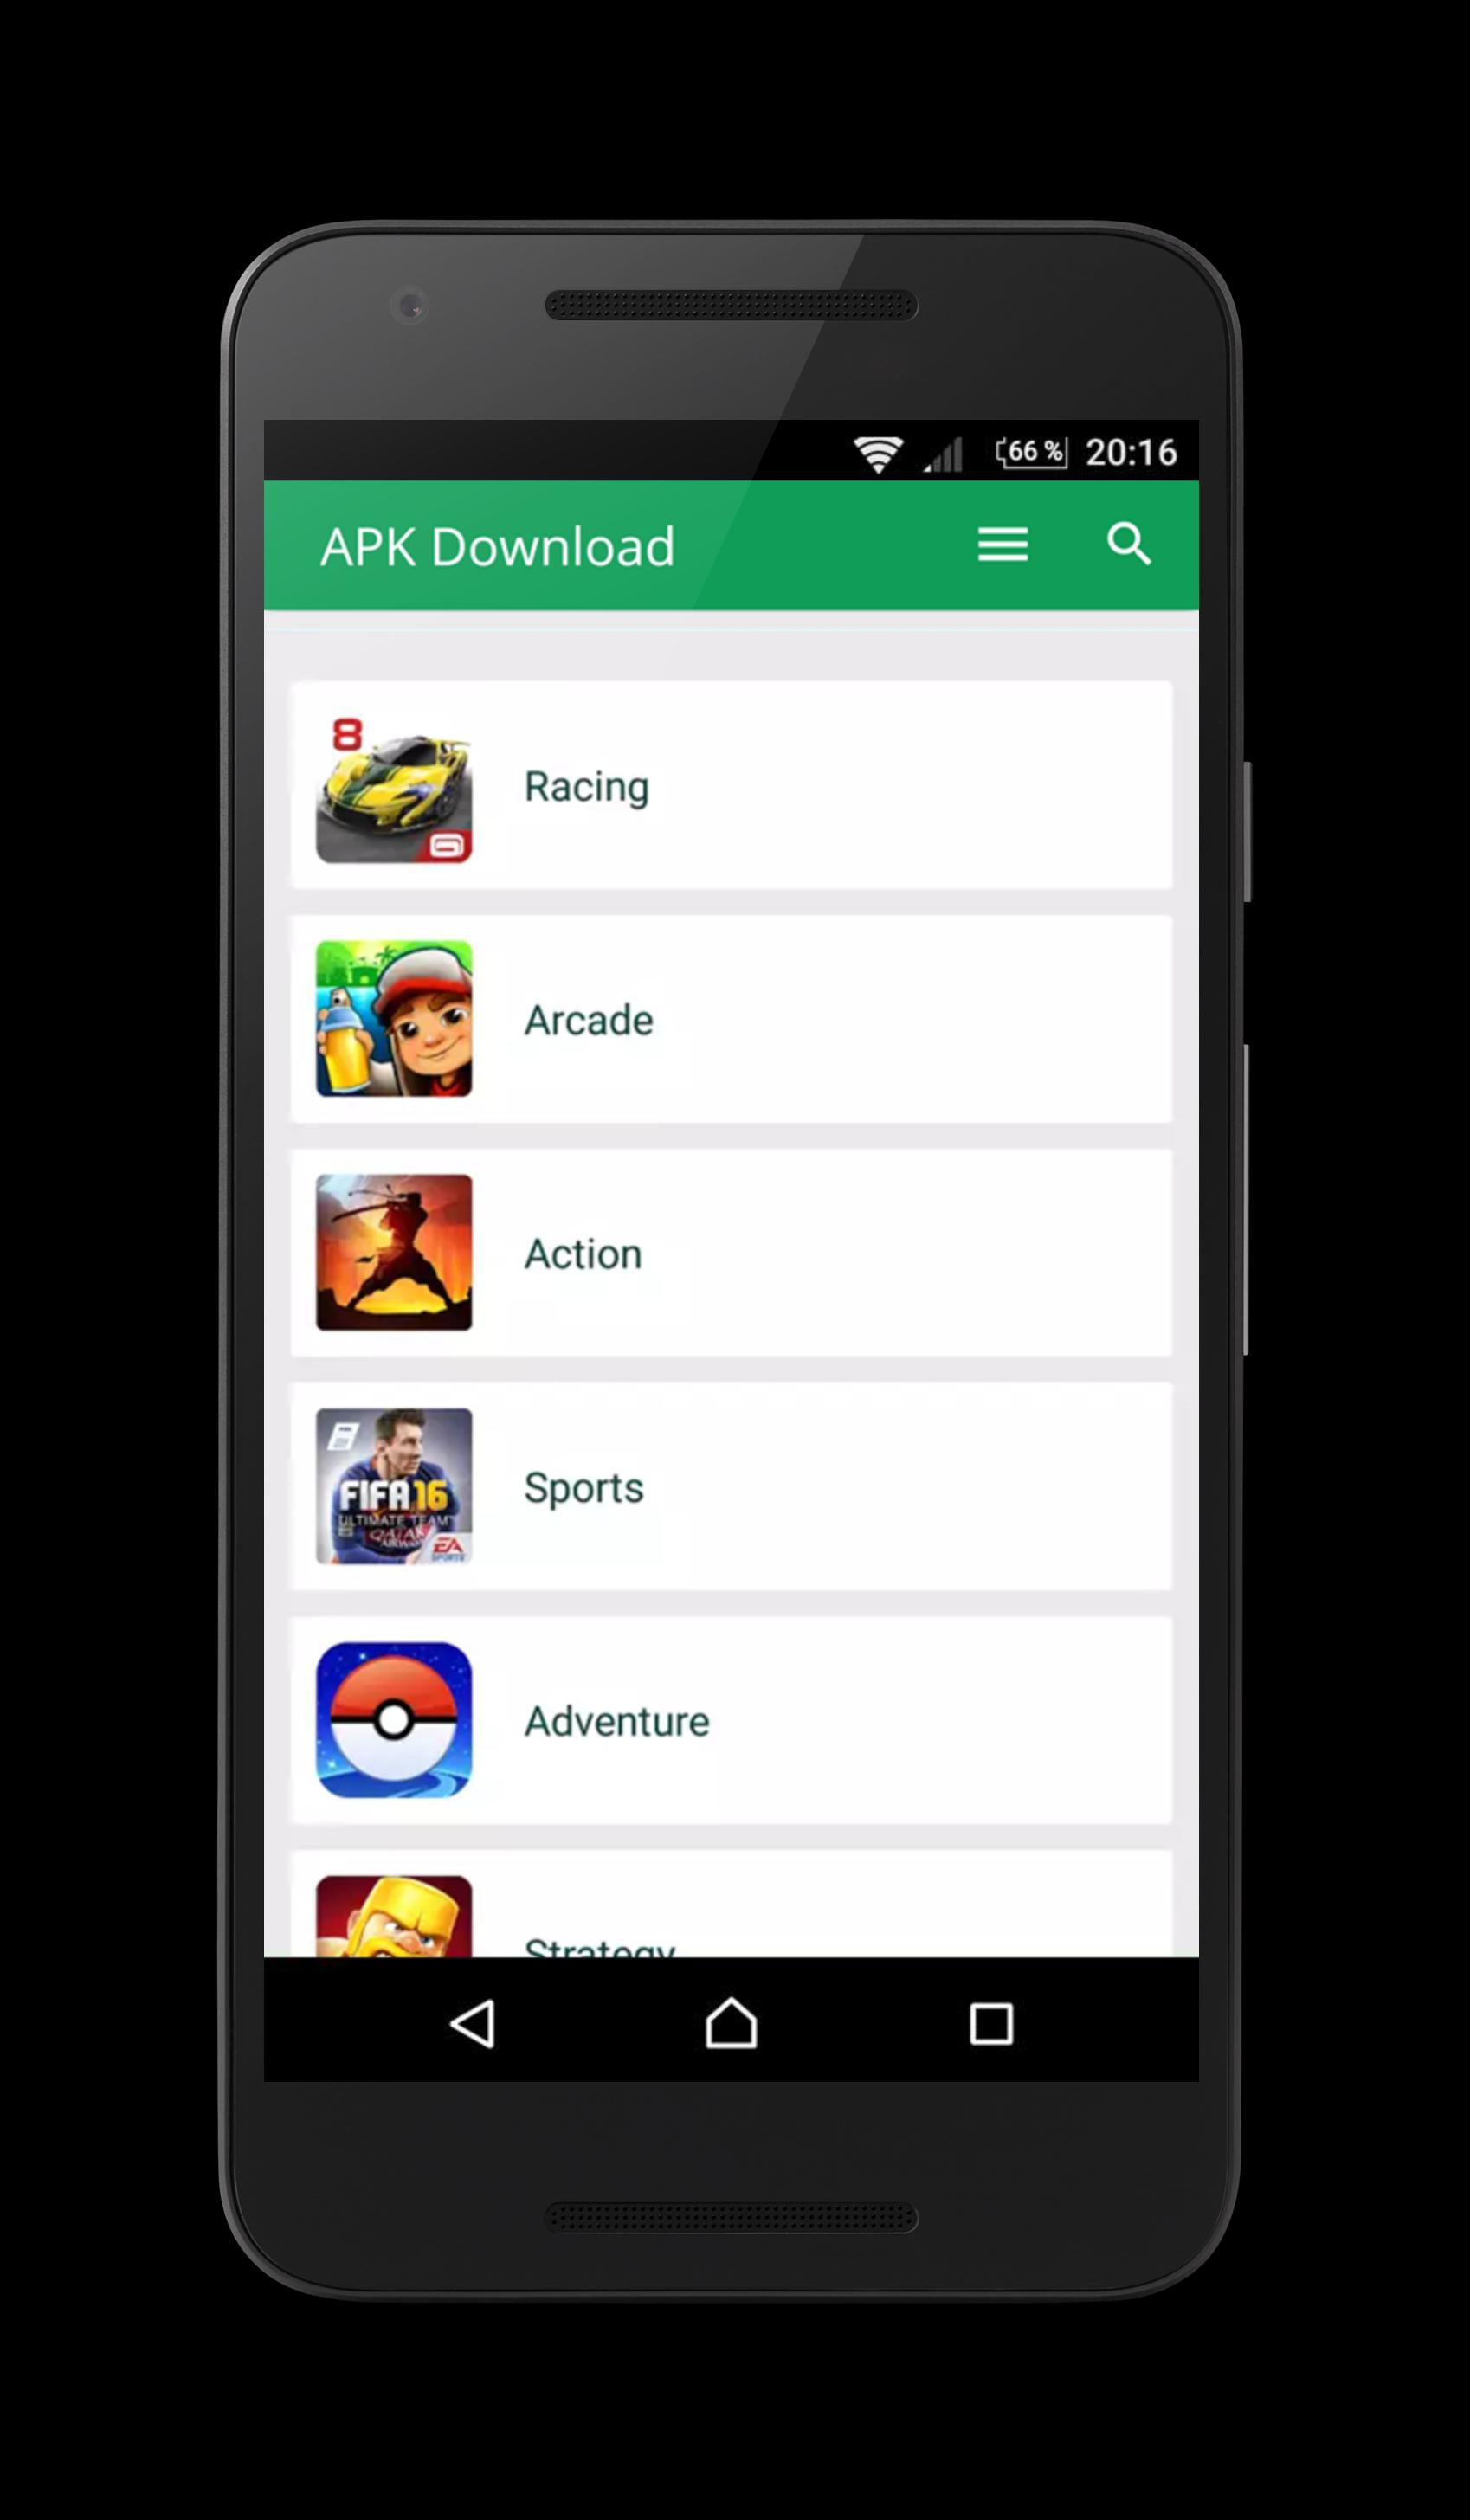 Ruletka Decyzji For Android Apk Download